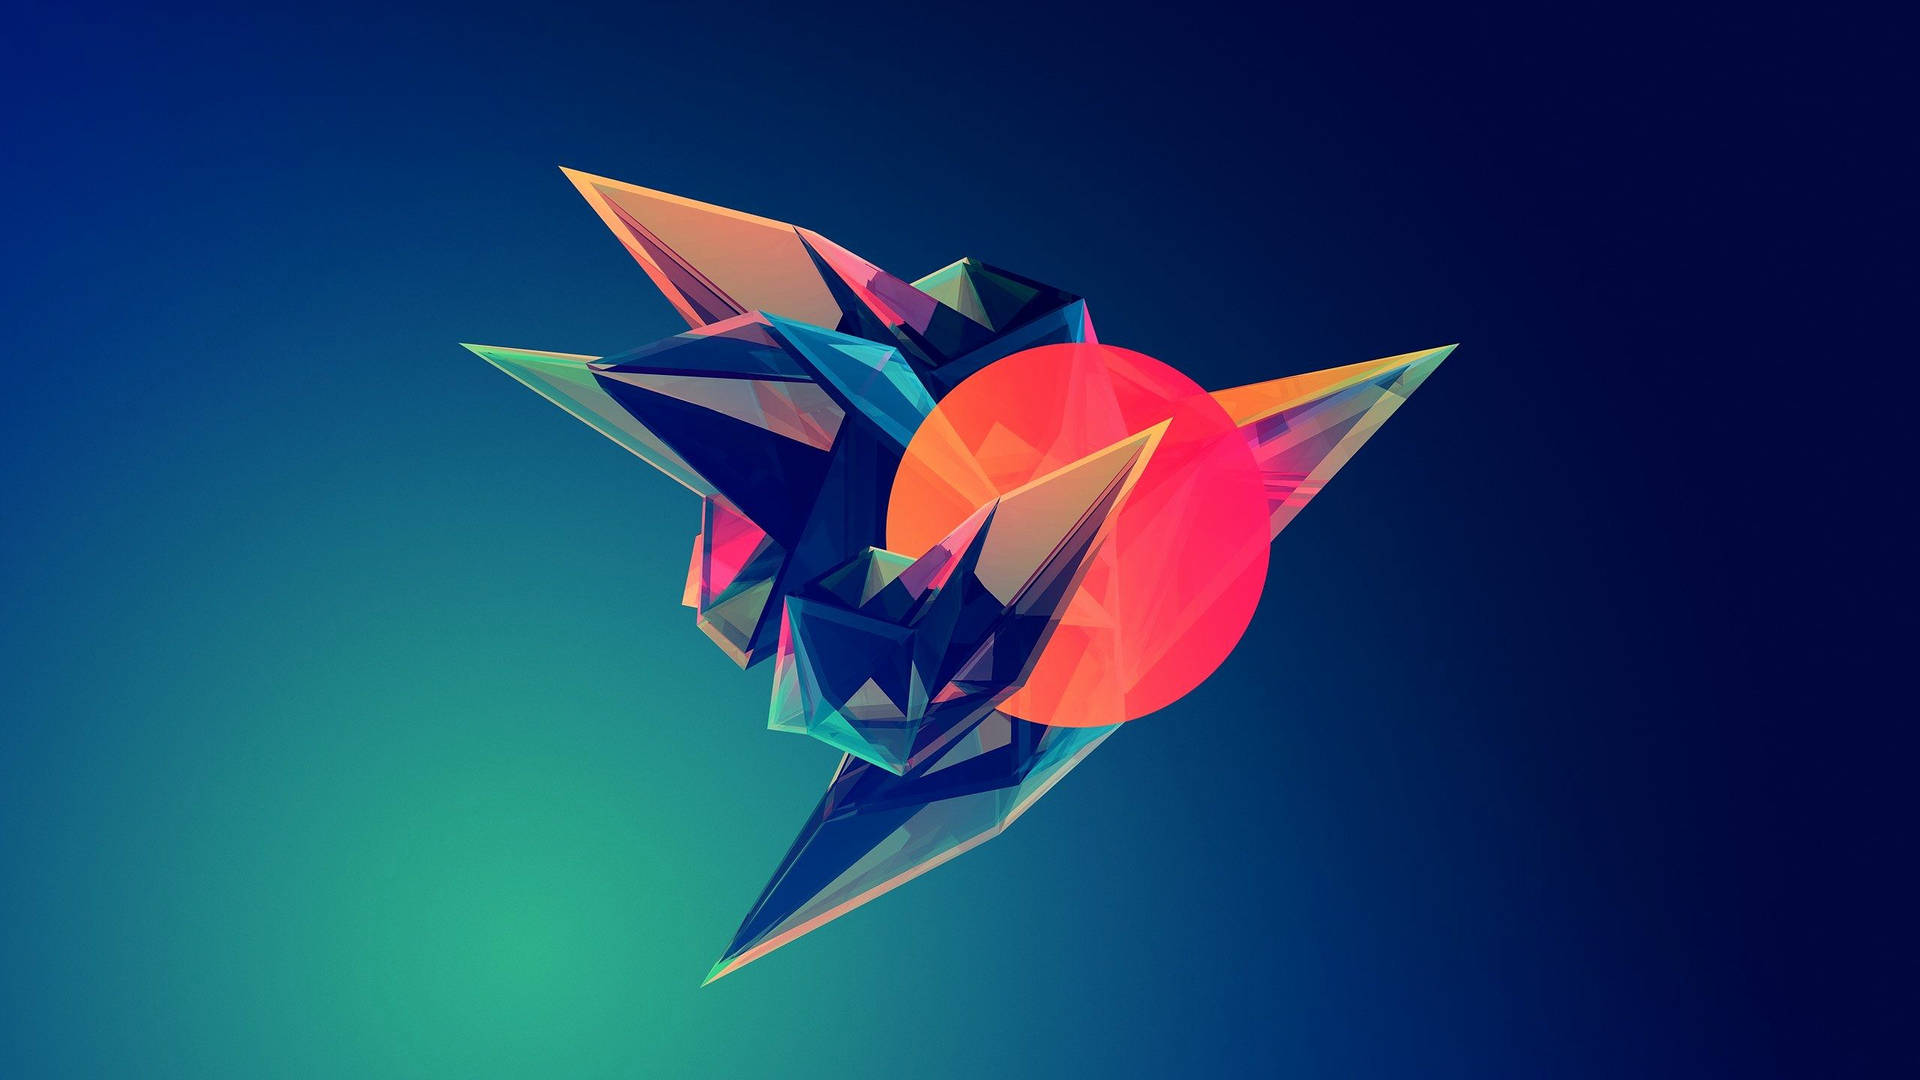 Low Poly Origami Background